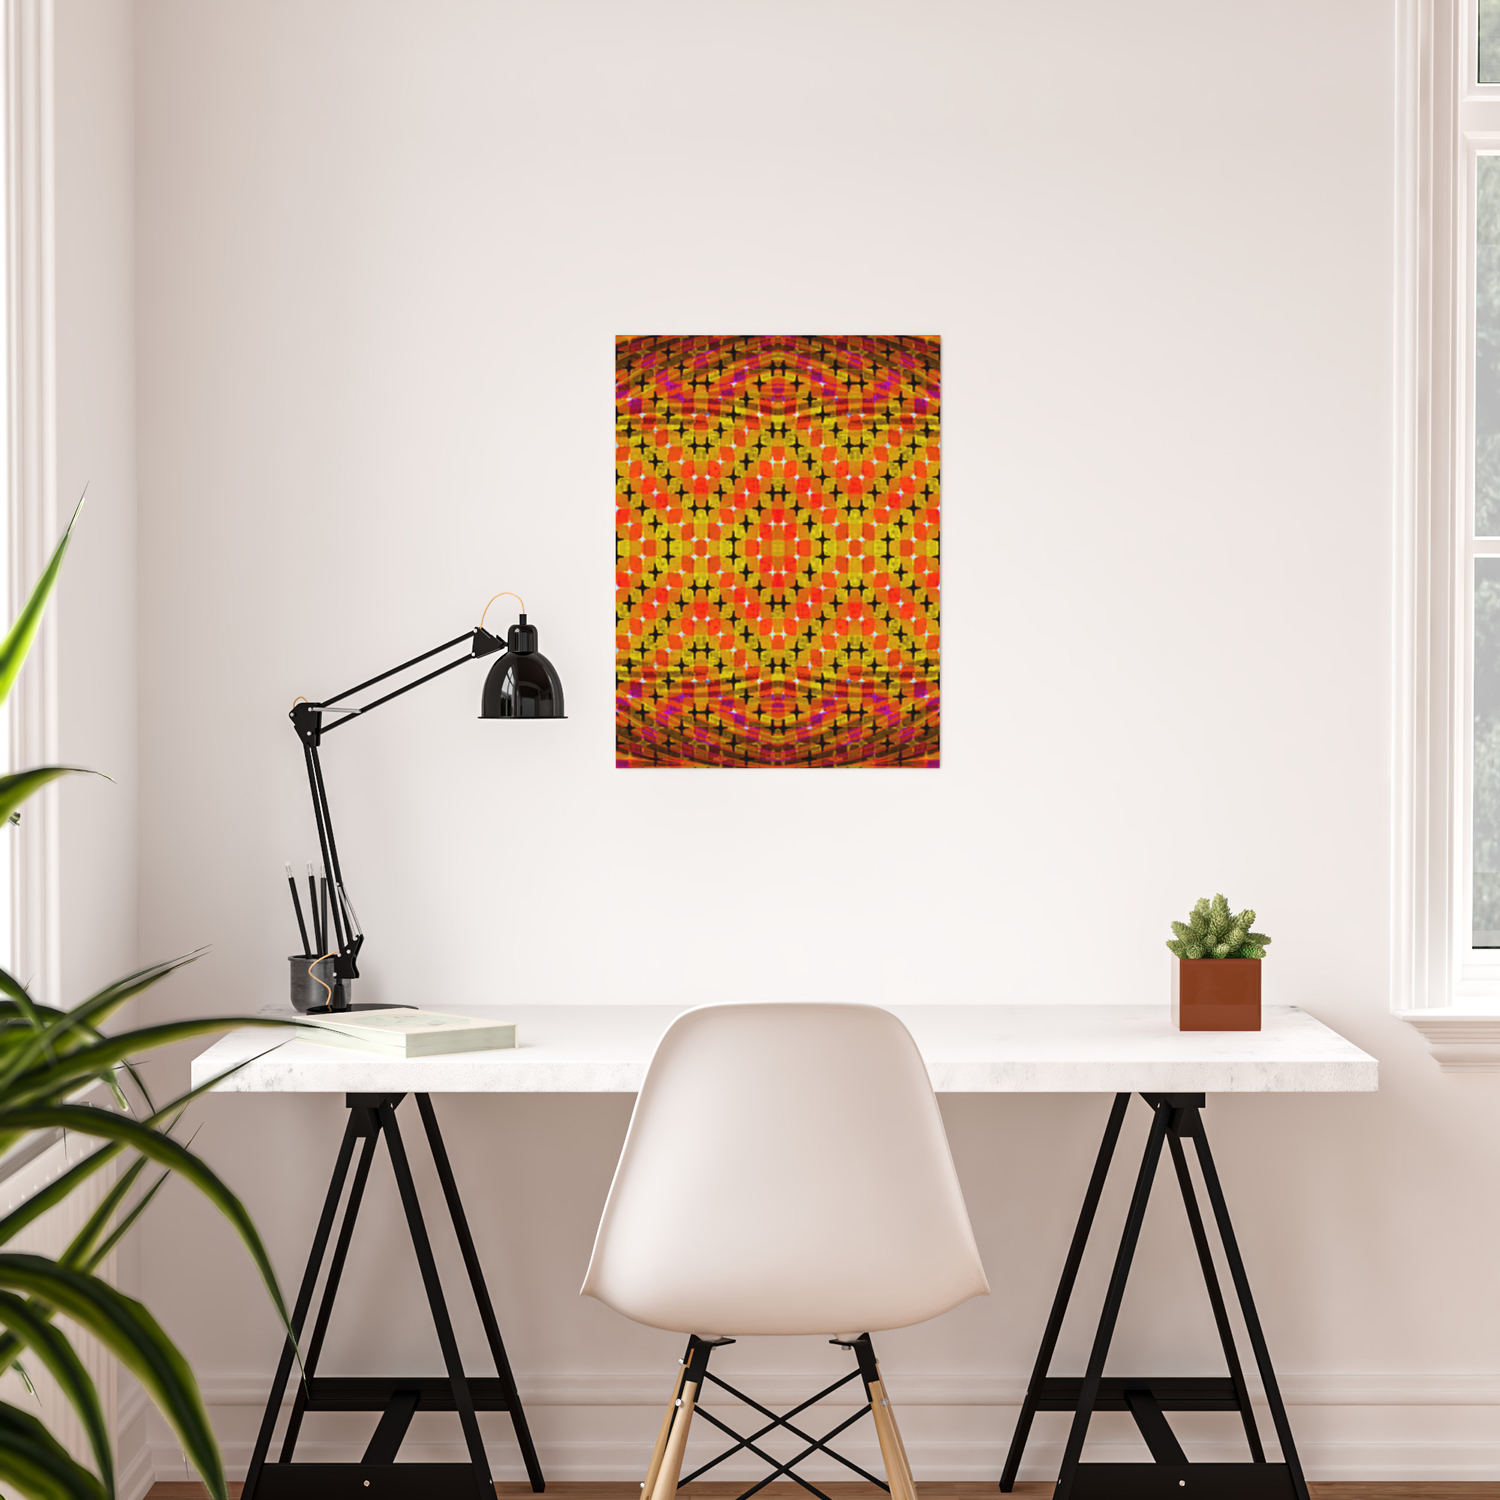 Flux 2 Optical Illusion Vibrant Colorful Psychedelic Trippy Design Poster By Capartwork